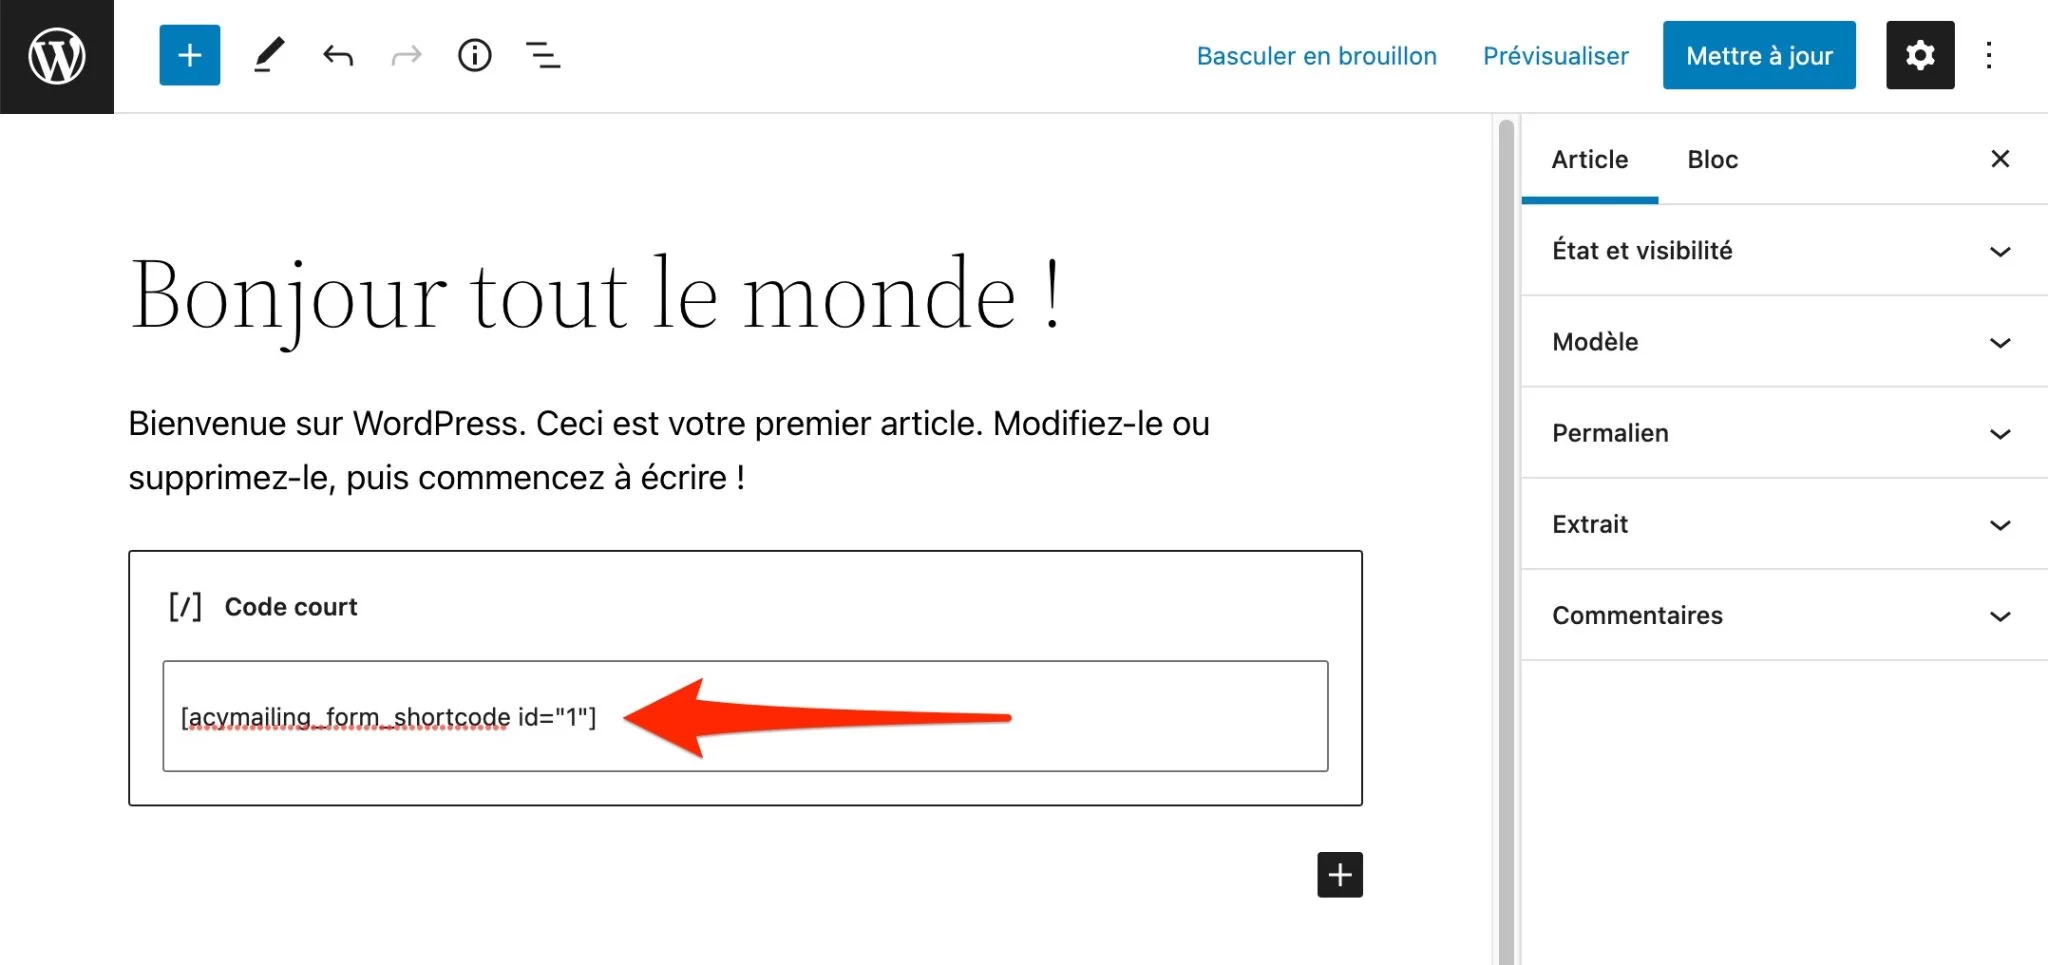 Thanks to a shortcode, you can embed a form in your content.